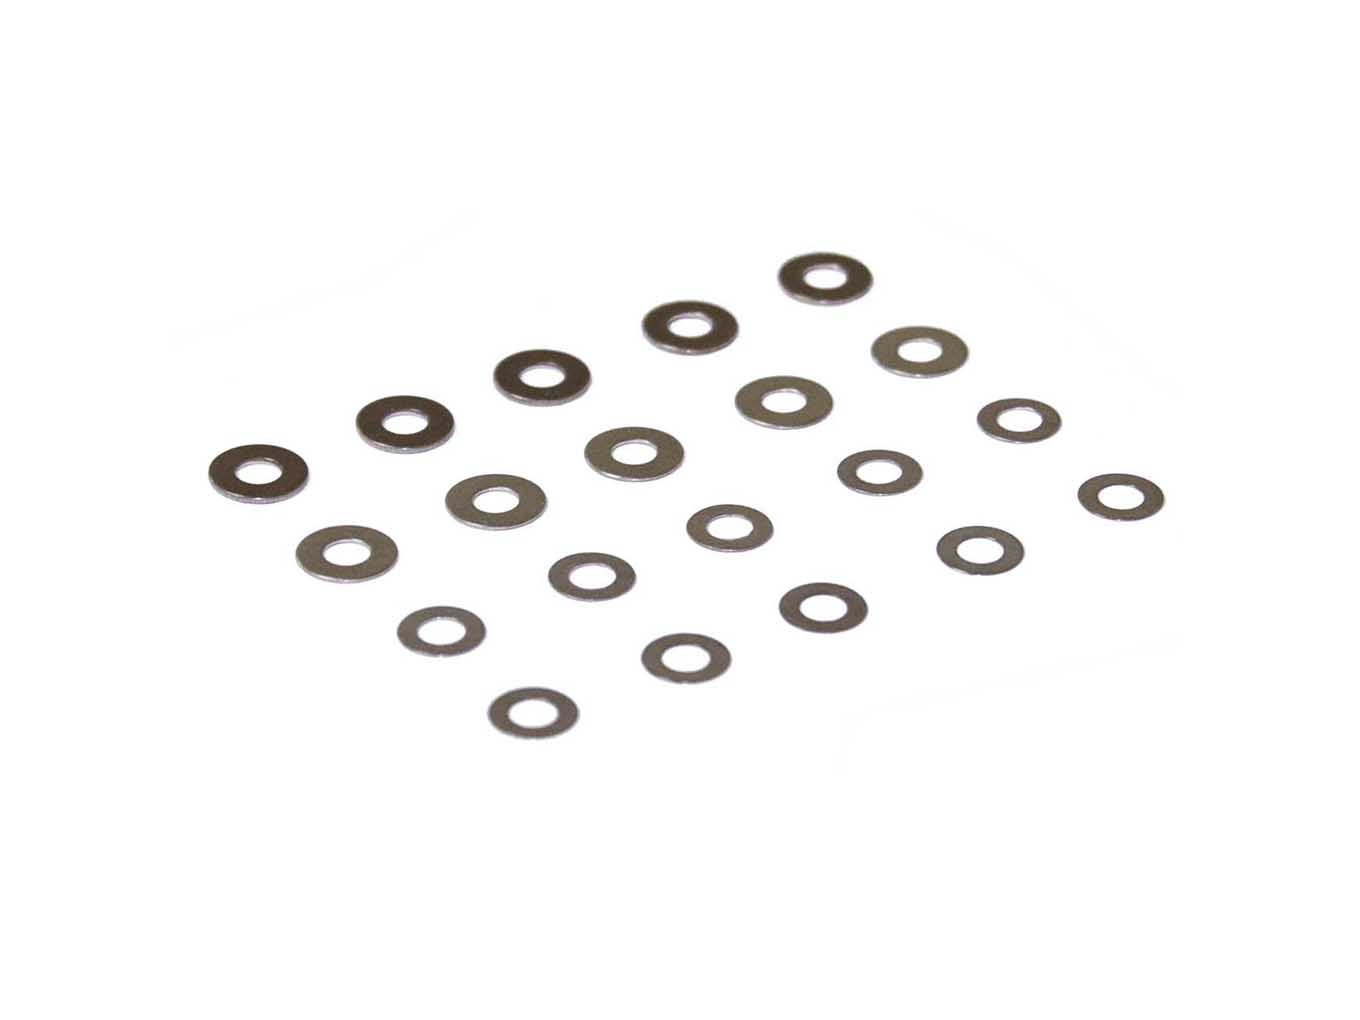 AOLS Shim Kit 20 Pieces Stainless Steel For Gearbox